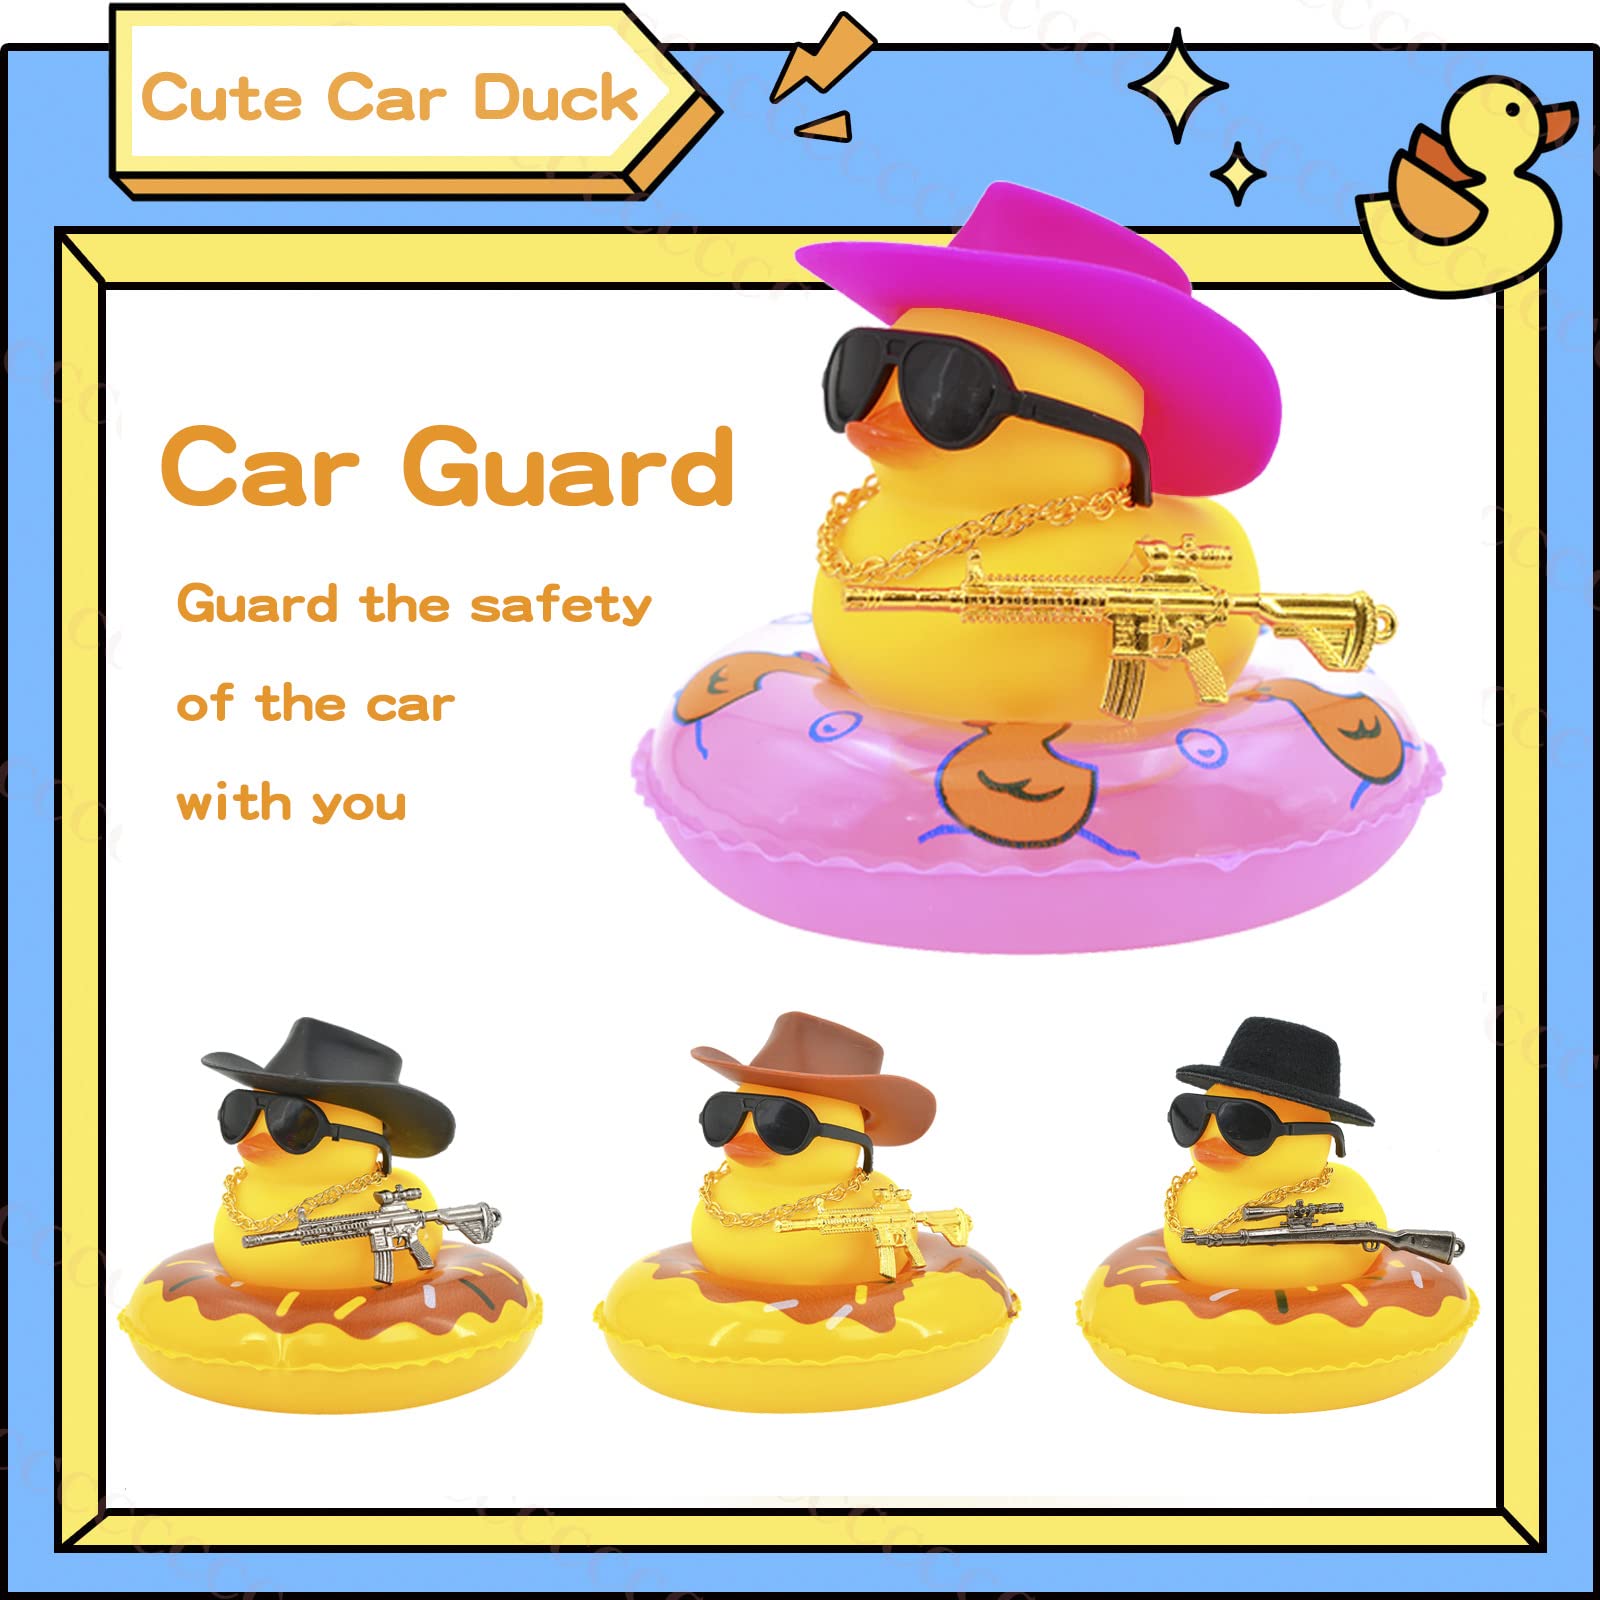 Ducks for Cars - Rubber Duck for Dashboard of Car, Yellow Duck Car Dashboard Decorations, Squeak Ducks Toys Car Ornaments Car Décor Accessories with Hat Swim Ring Necklace Sunglasses for Decor Home